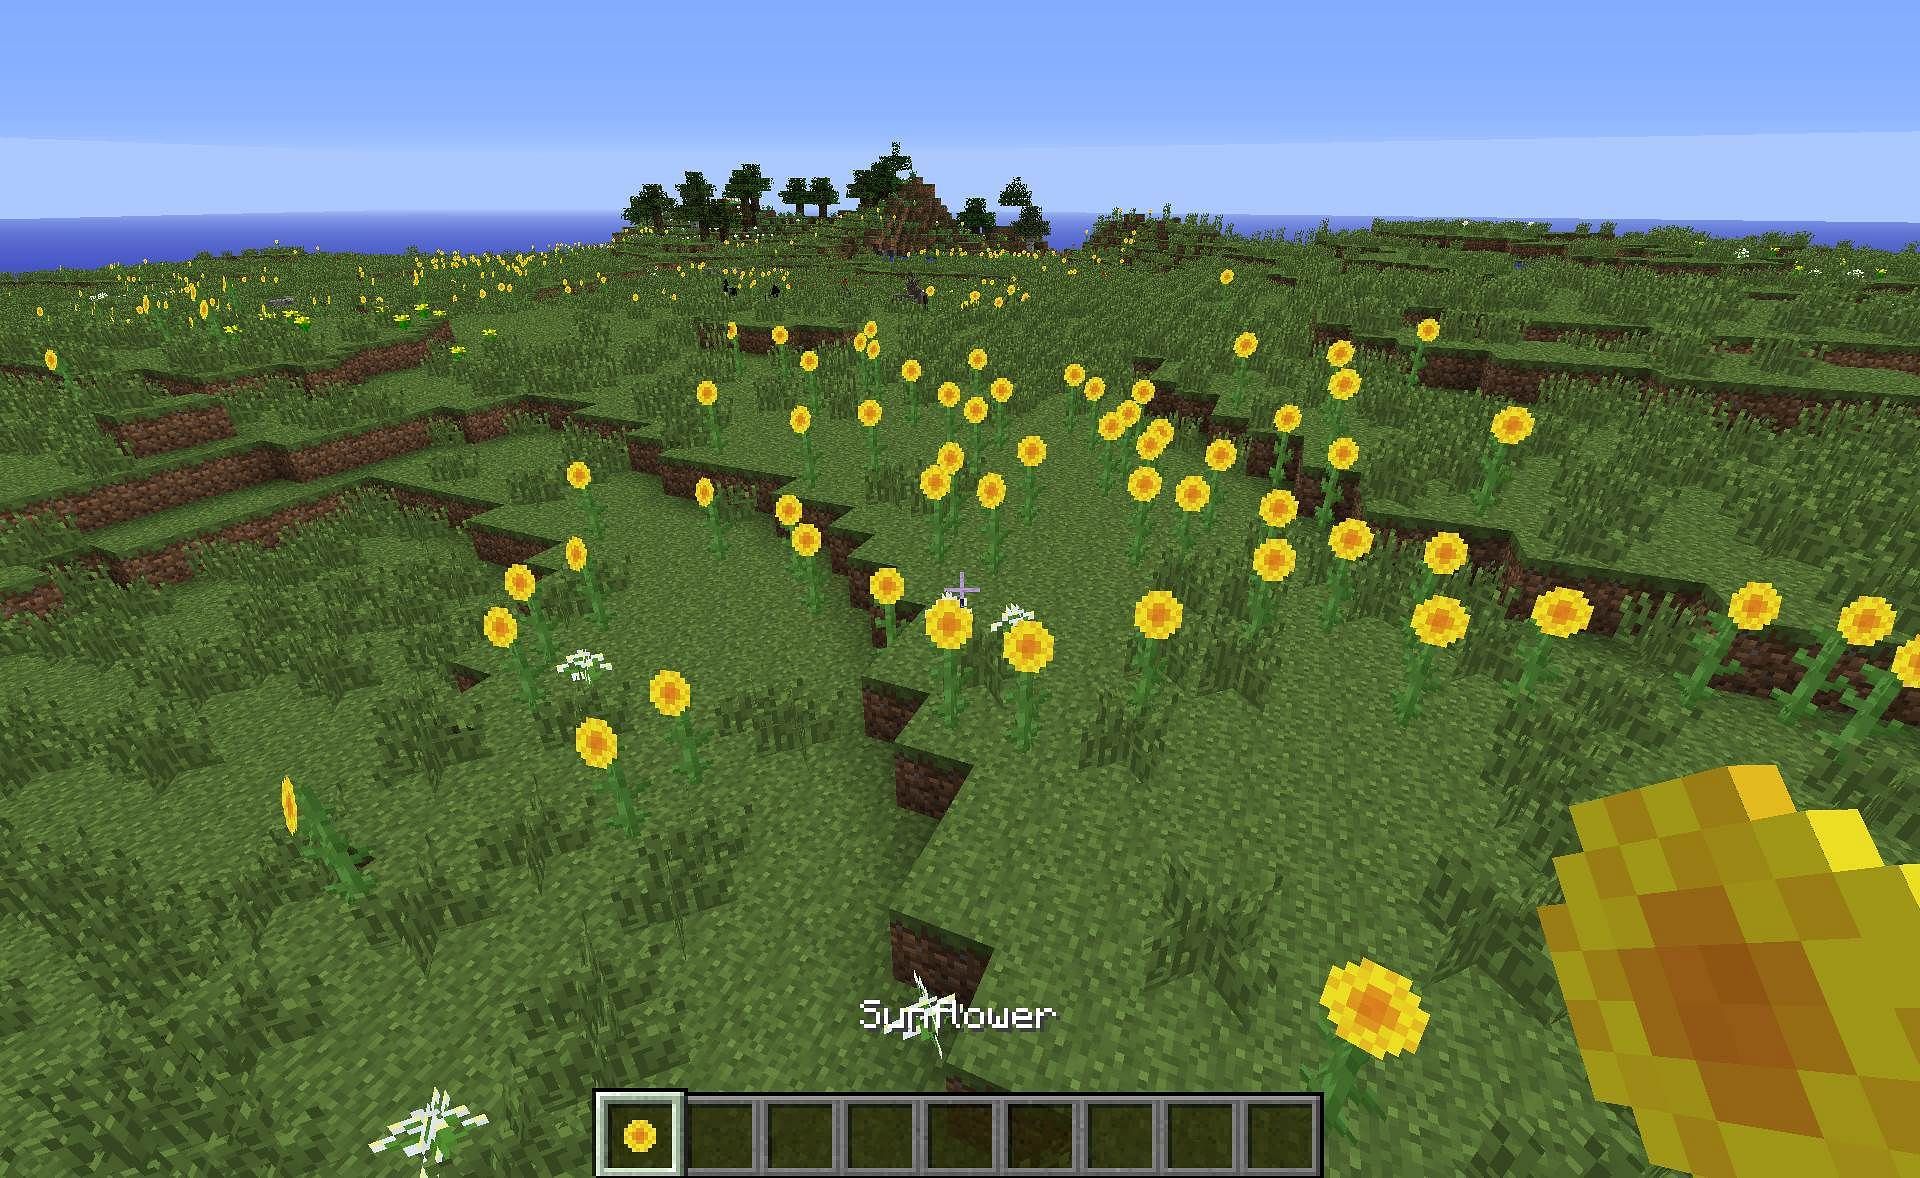 An example of a sunflower field (Image via Minecraft)